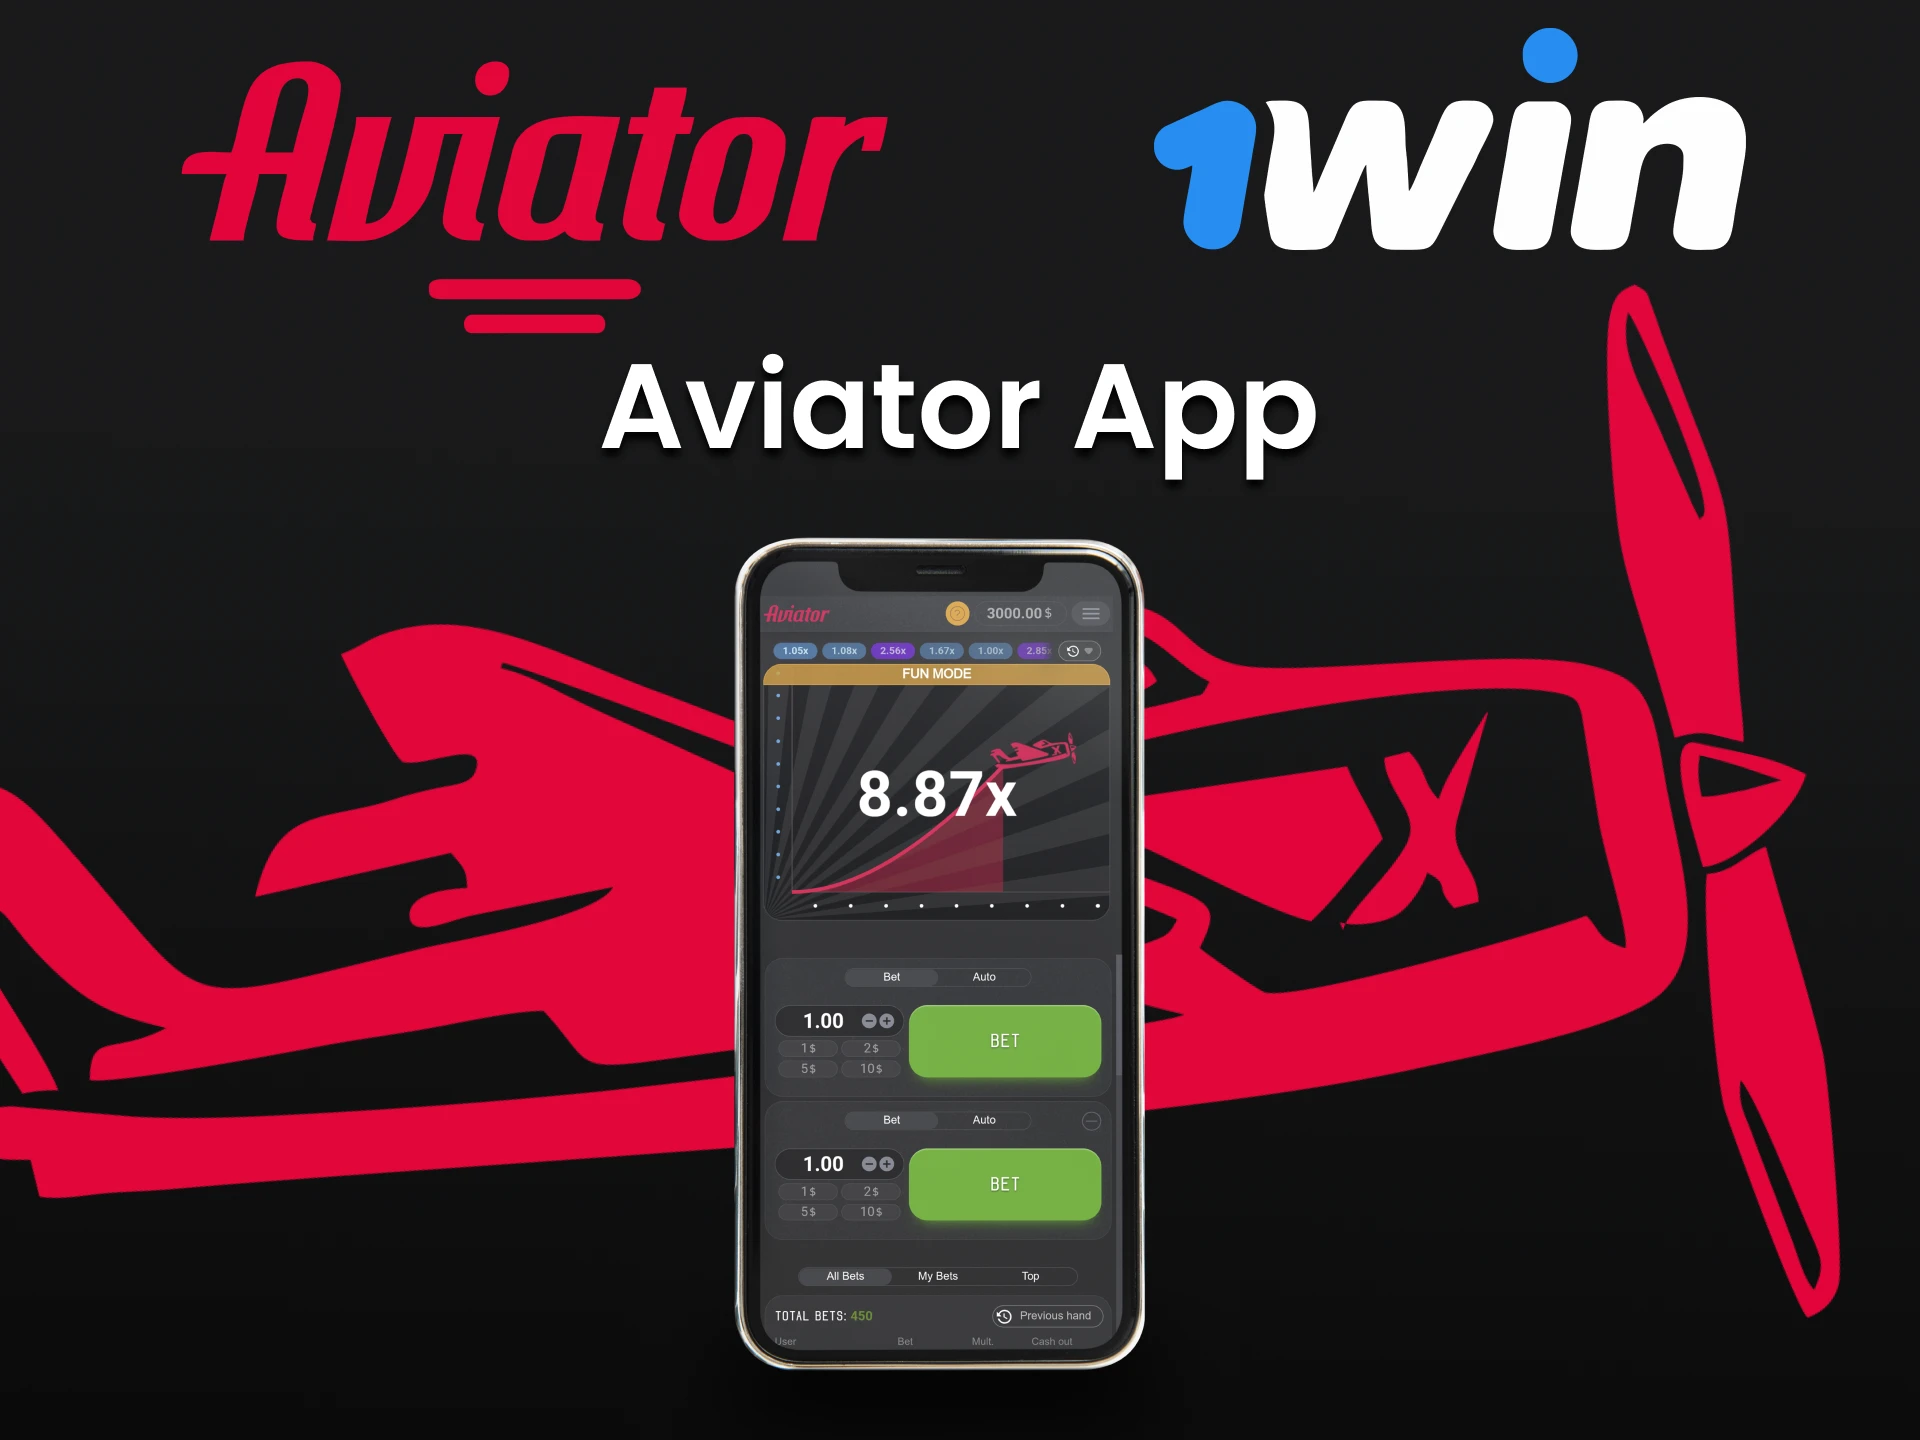 Play the Aviator game with the 1win app.